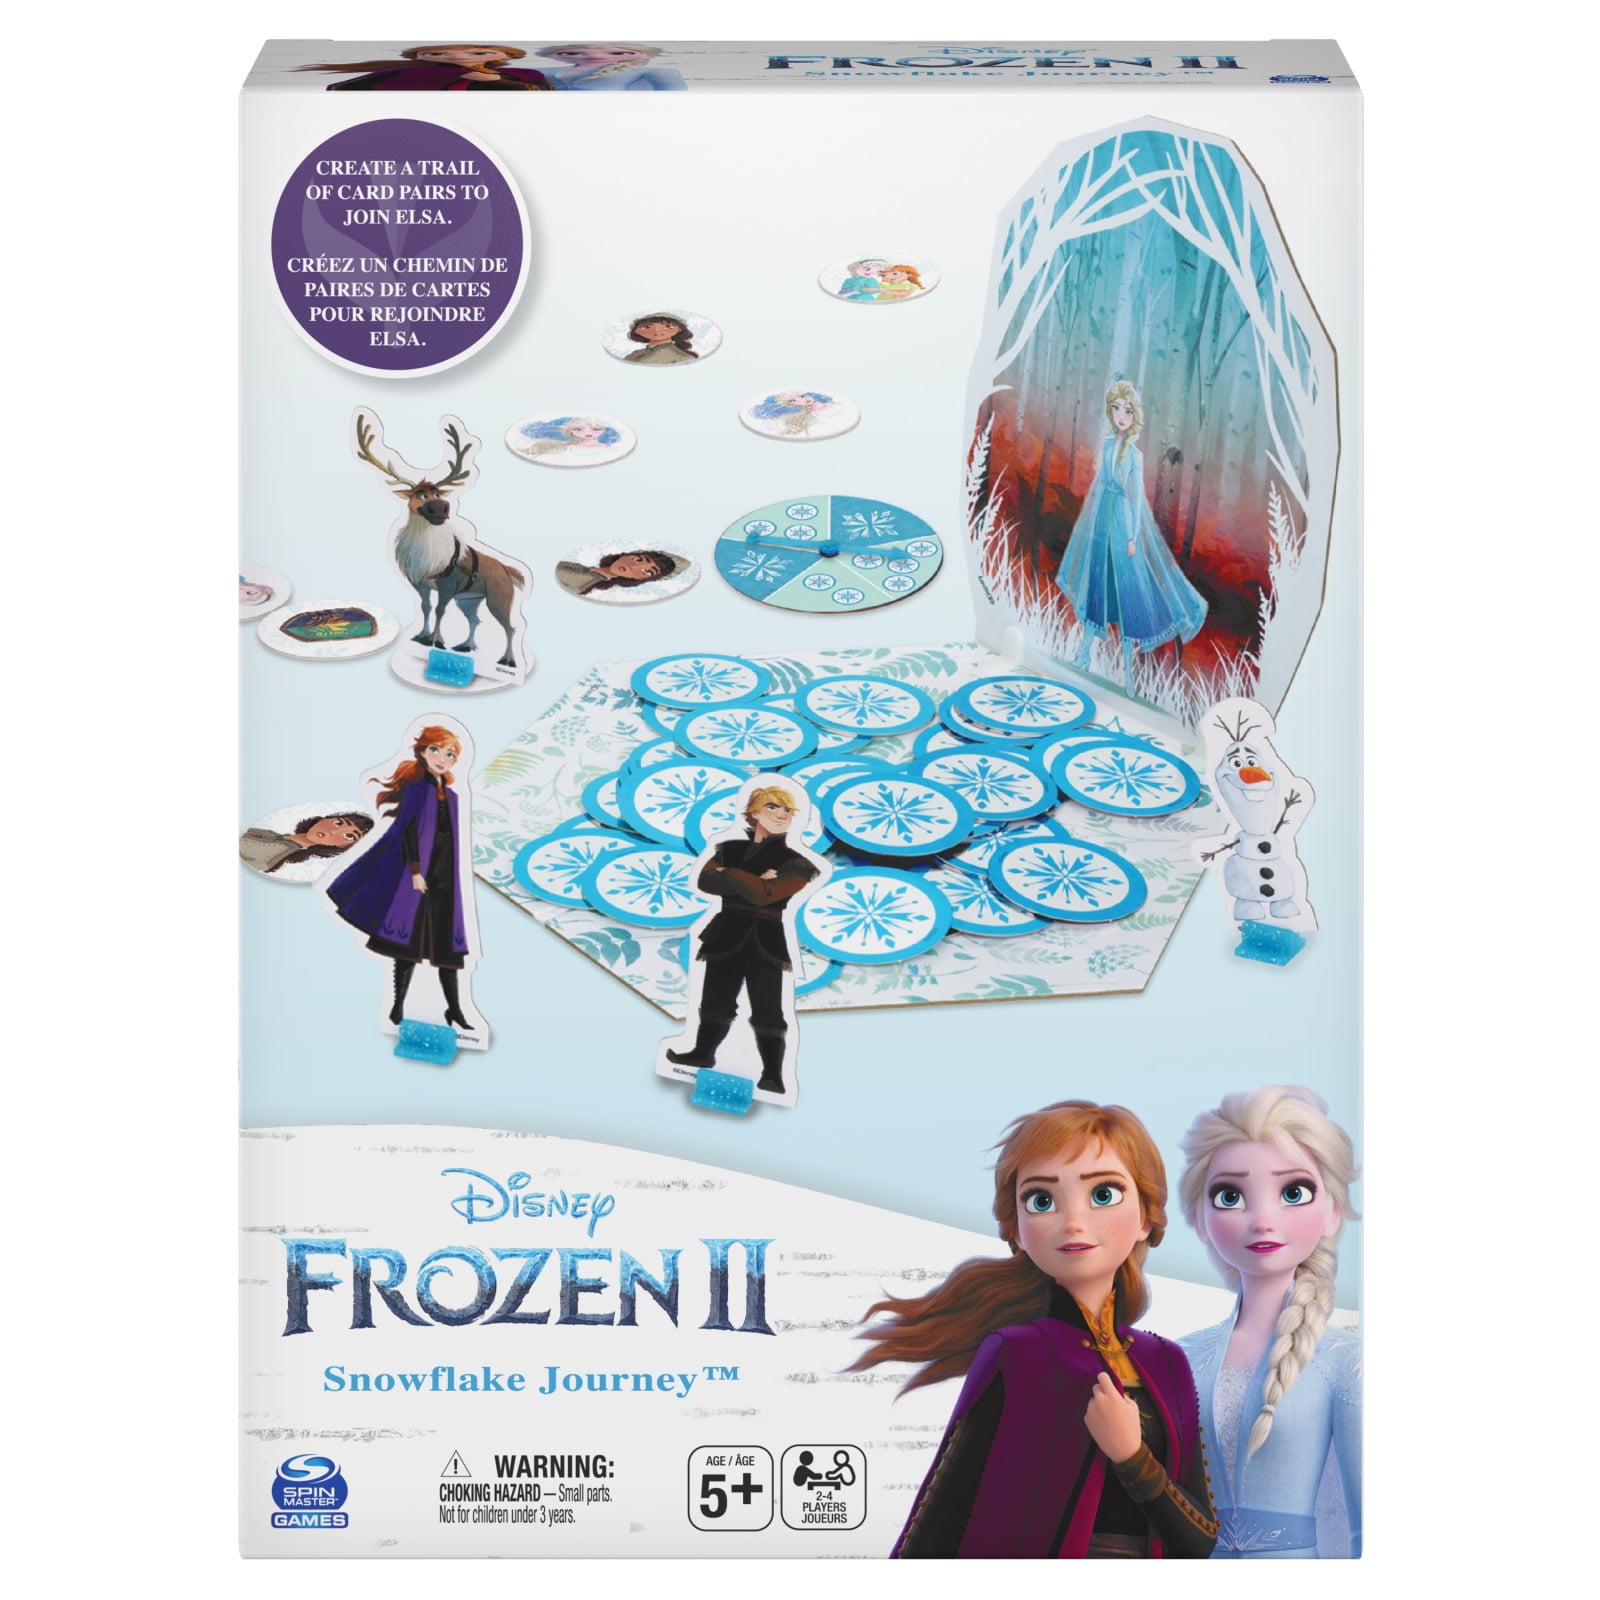 Cardinal Games Frozen 2 Frosted Fishing Game 6054132 for sale online 